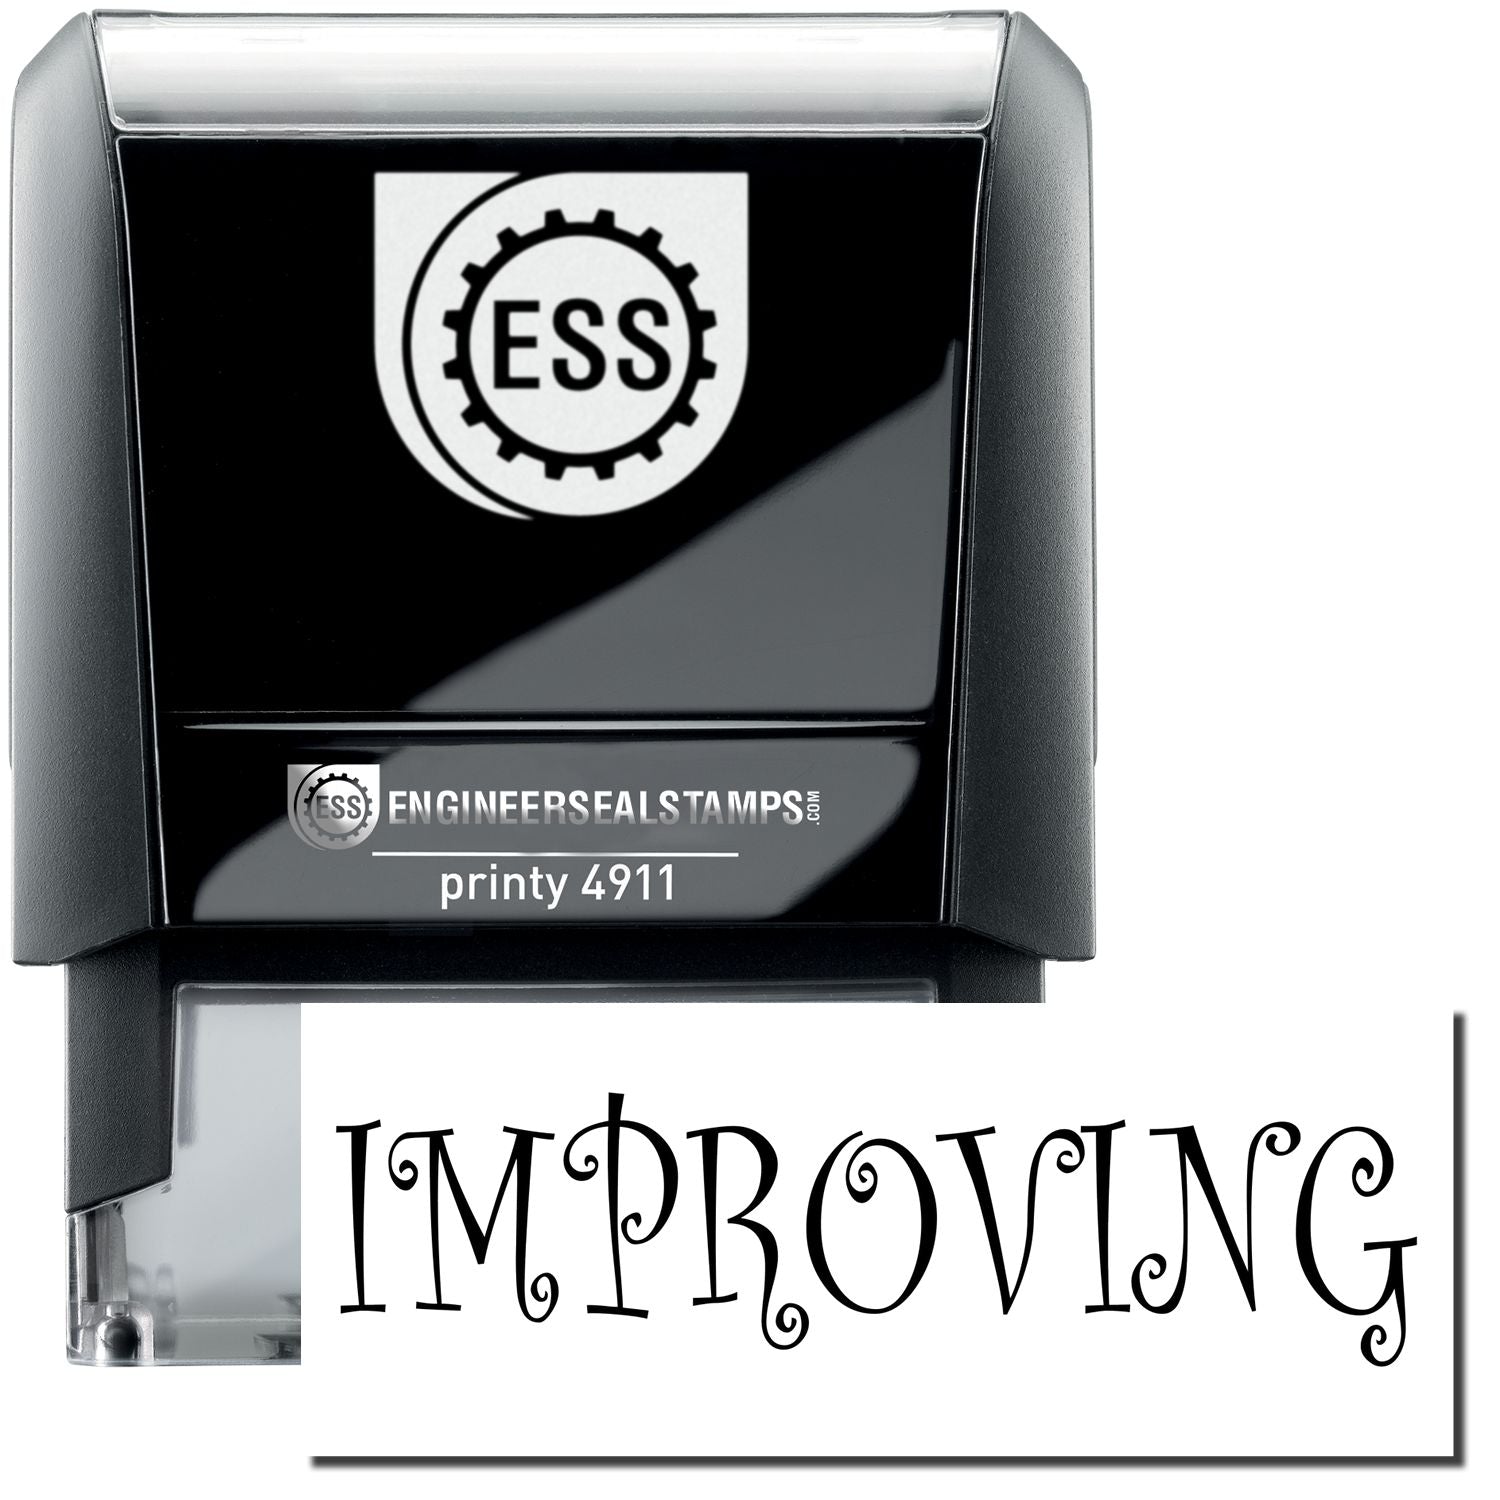 A self-inking stamp with a stamped image showing how the text "IMPROVING" is displayed after stamping.